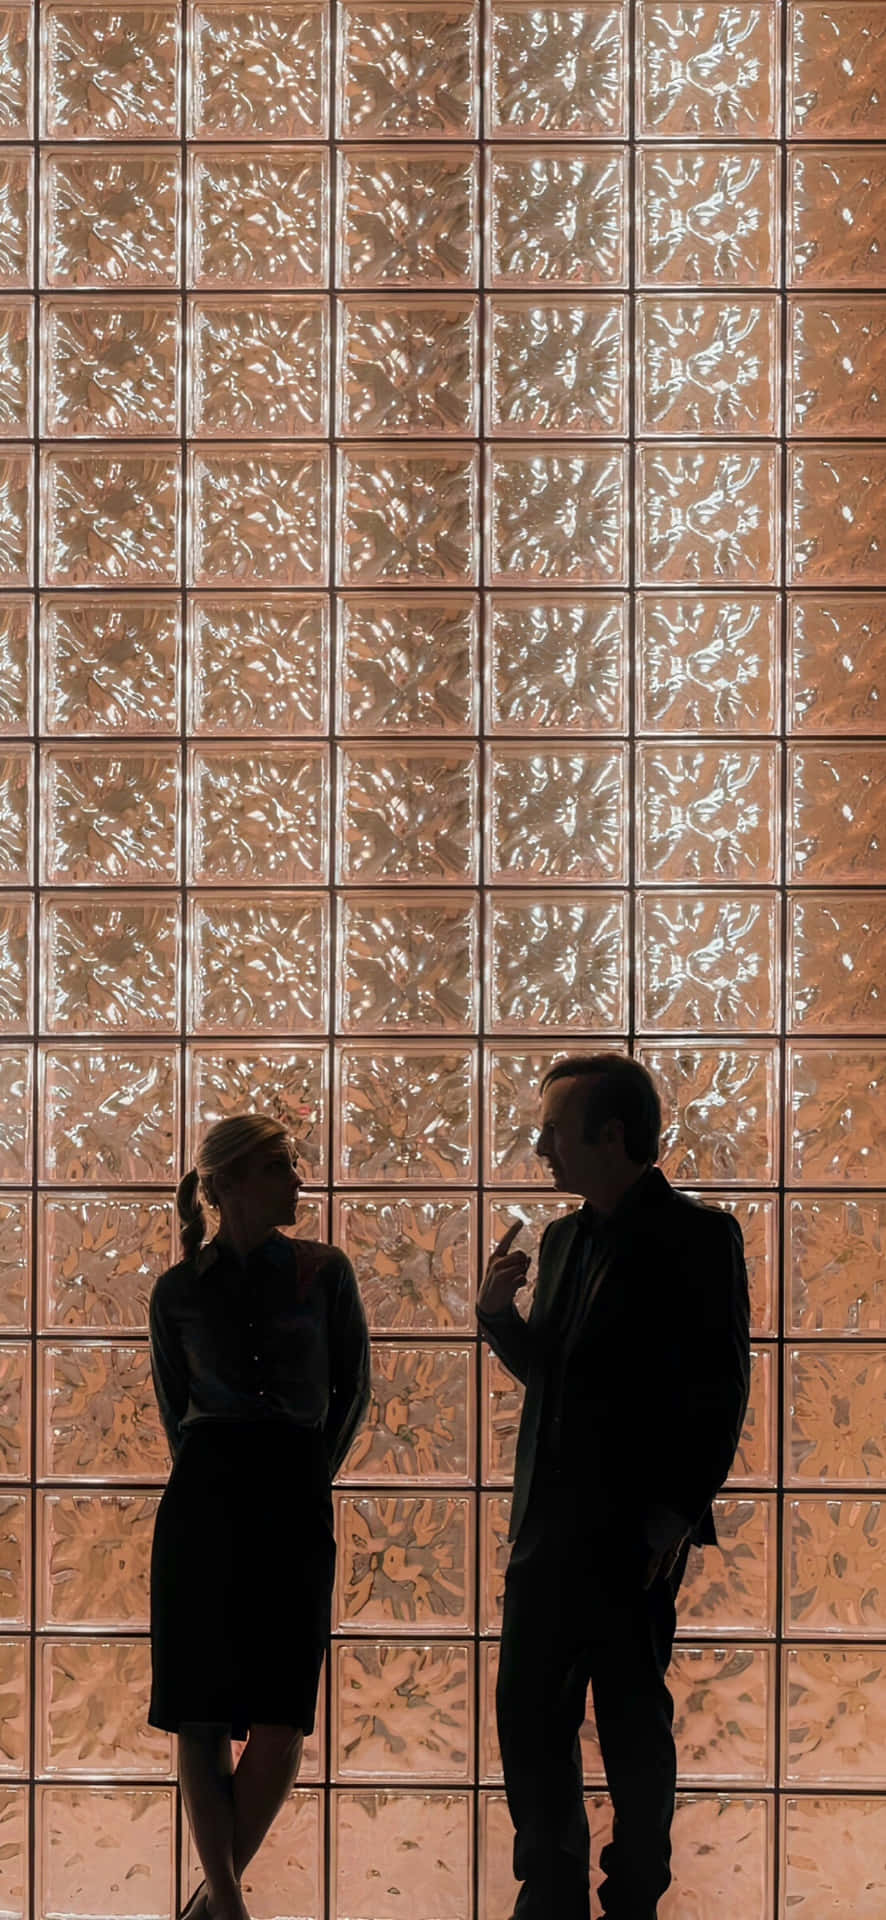 Silhouetted Conversation Against Decorative Wall Wallpaper